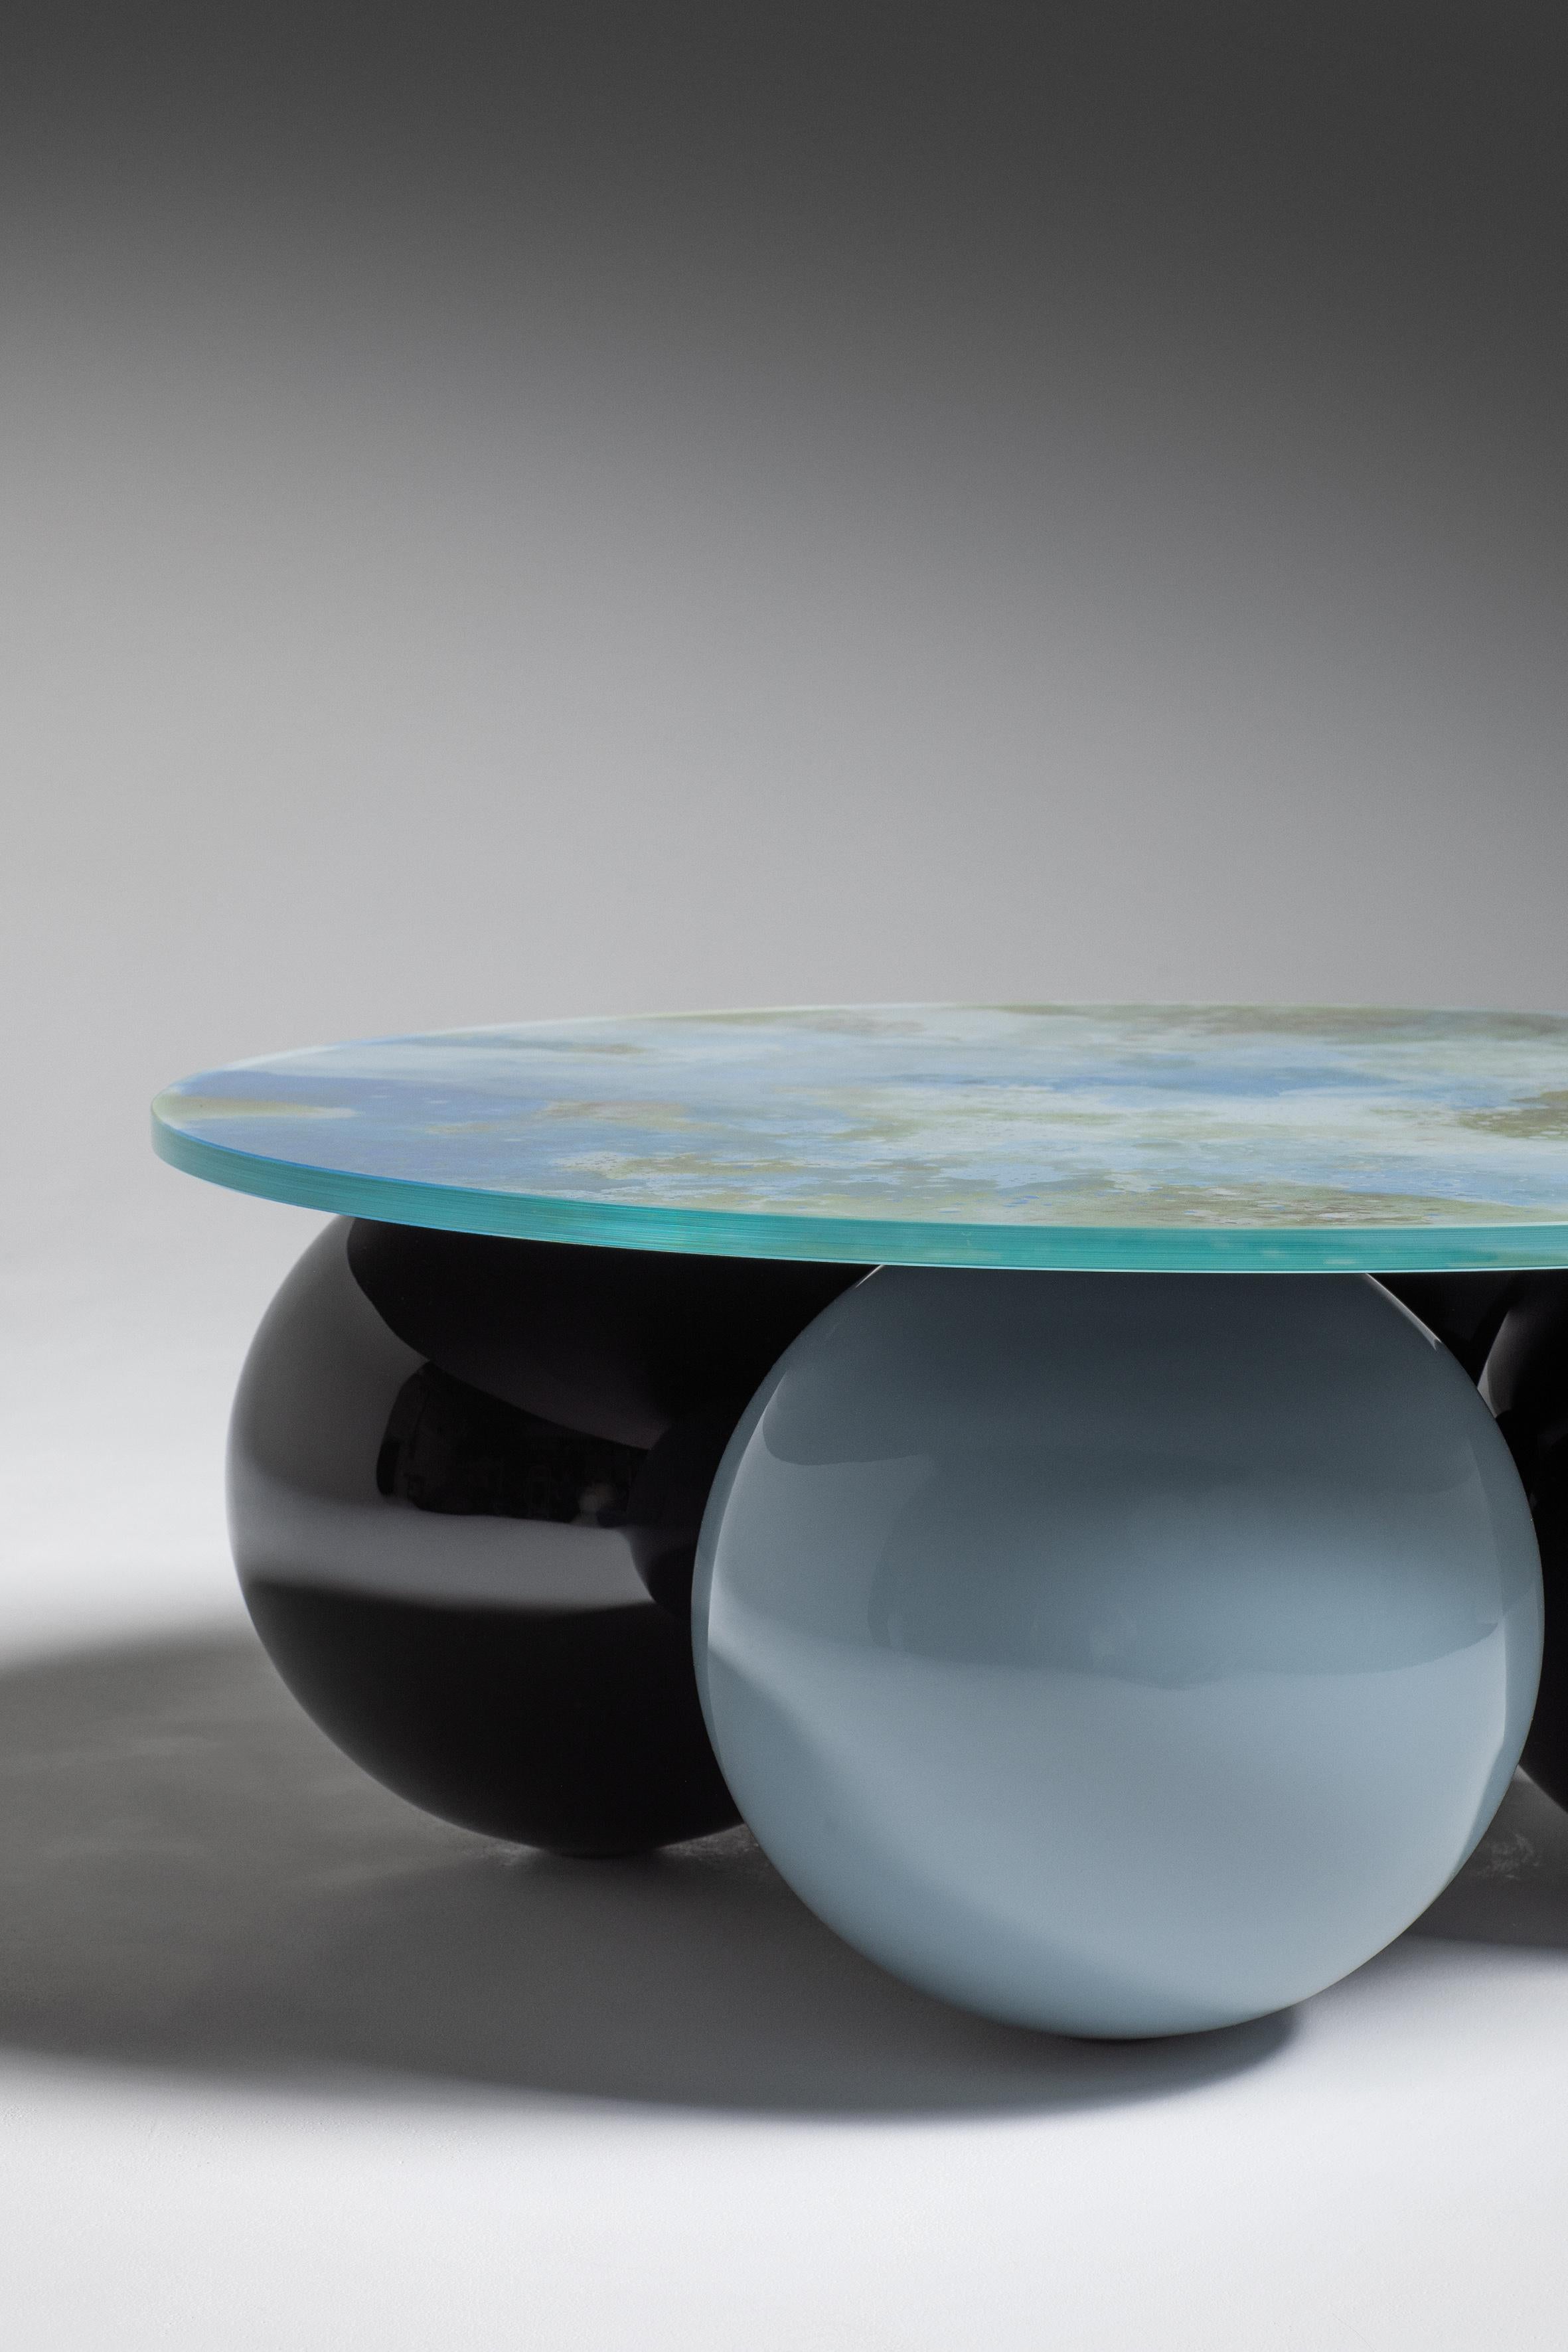 Giulia coffee table, Memphis, France, Le Berre Vevaud
Empreinte Collection
Eglomise glass top (design may vary for each production)
Solid beech ball base, glossy black and grey blue lacquered finish


For their second collection, Raphaël Le